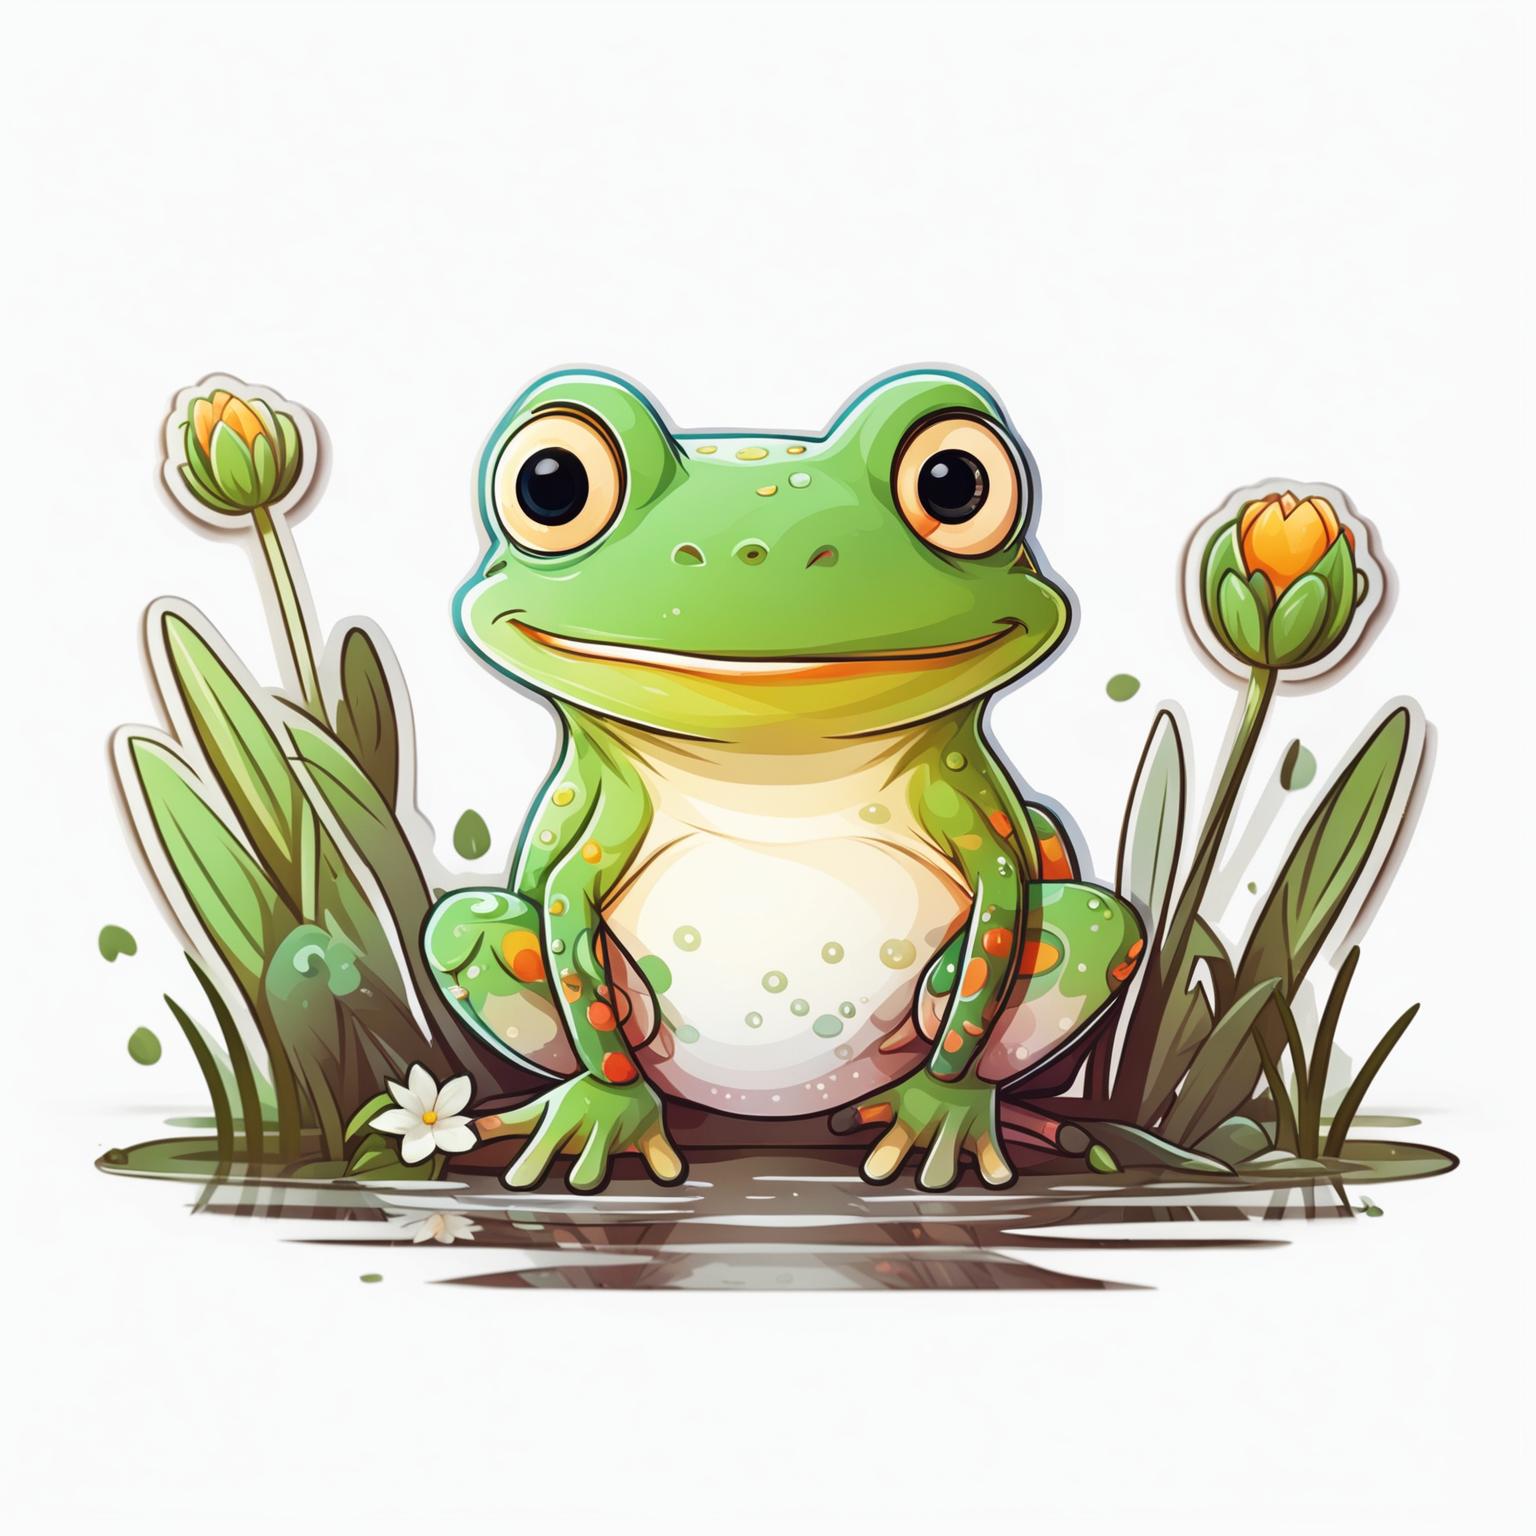 Sticker design of an adorable frog with a cute expression in a playful pose, surrounded by simple natural elements like grass, flowers, or a lily pad